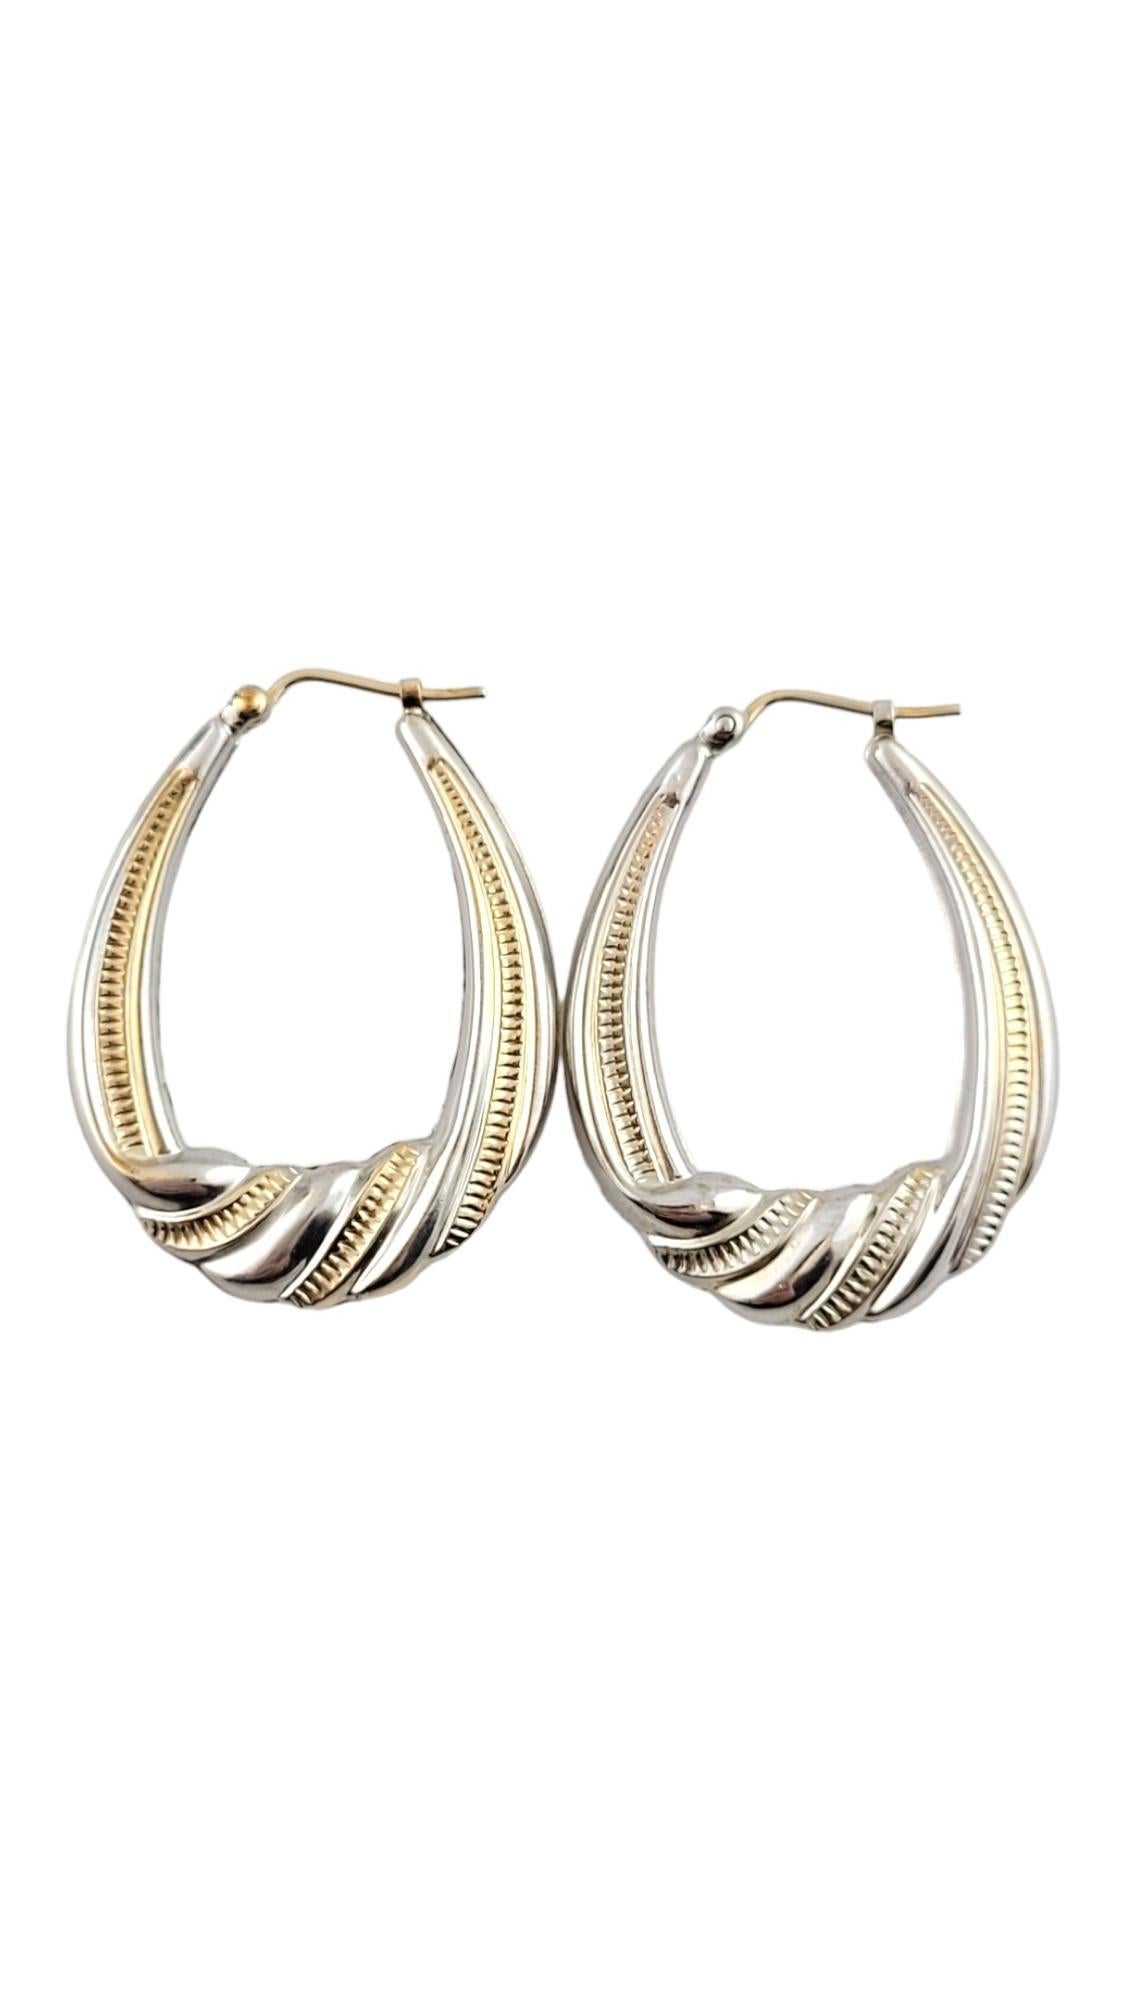 14K 2-Tone Yellow and White Gold Twisted Hoop Earrings #16128 In Good Condition For Sale In Washington Depot, CT